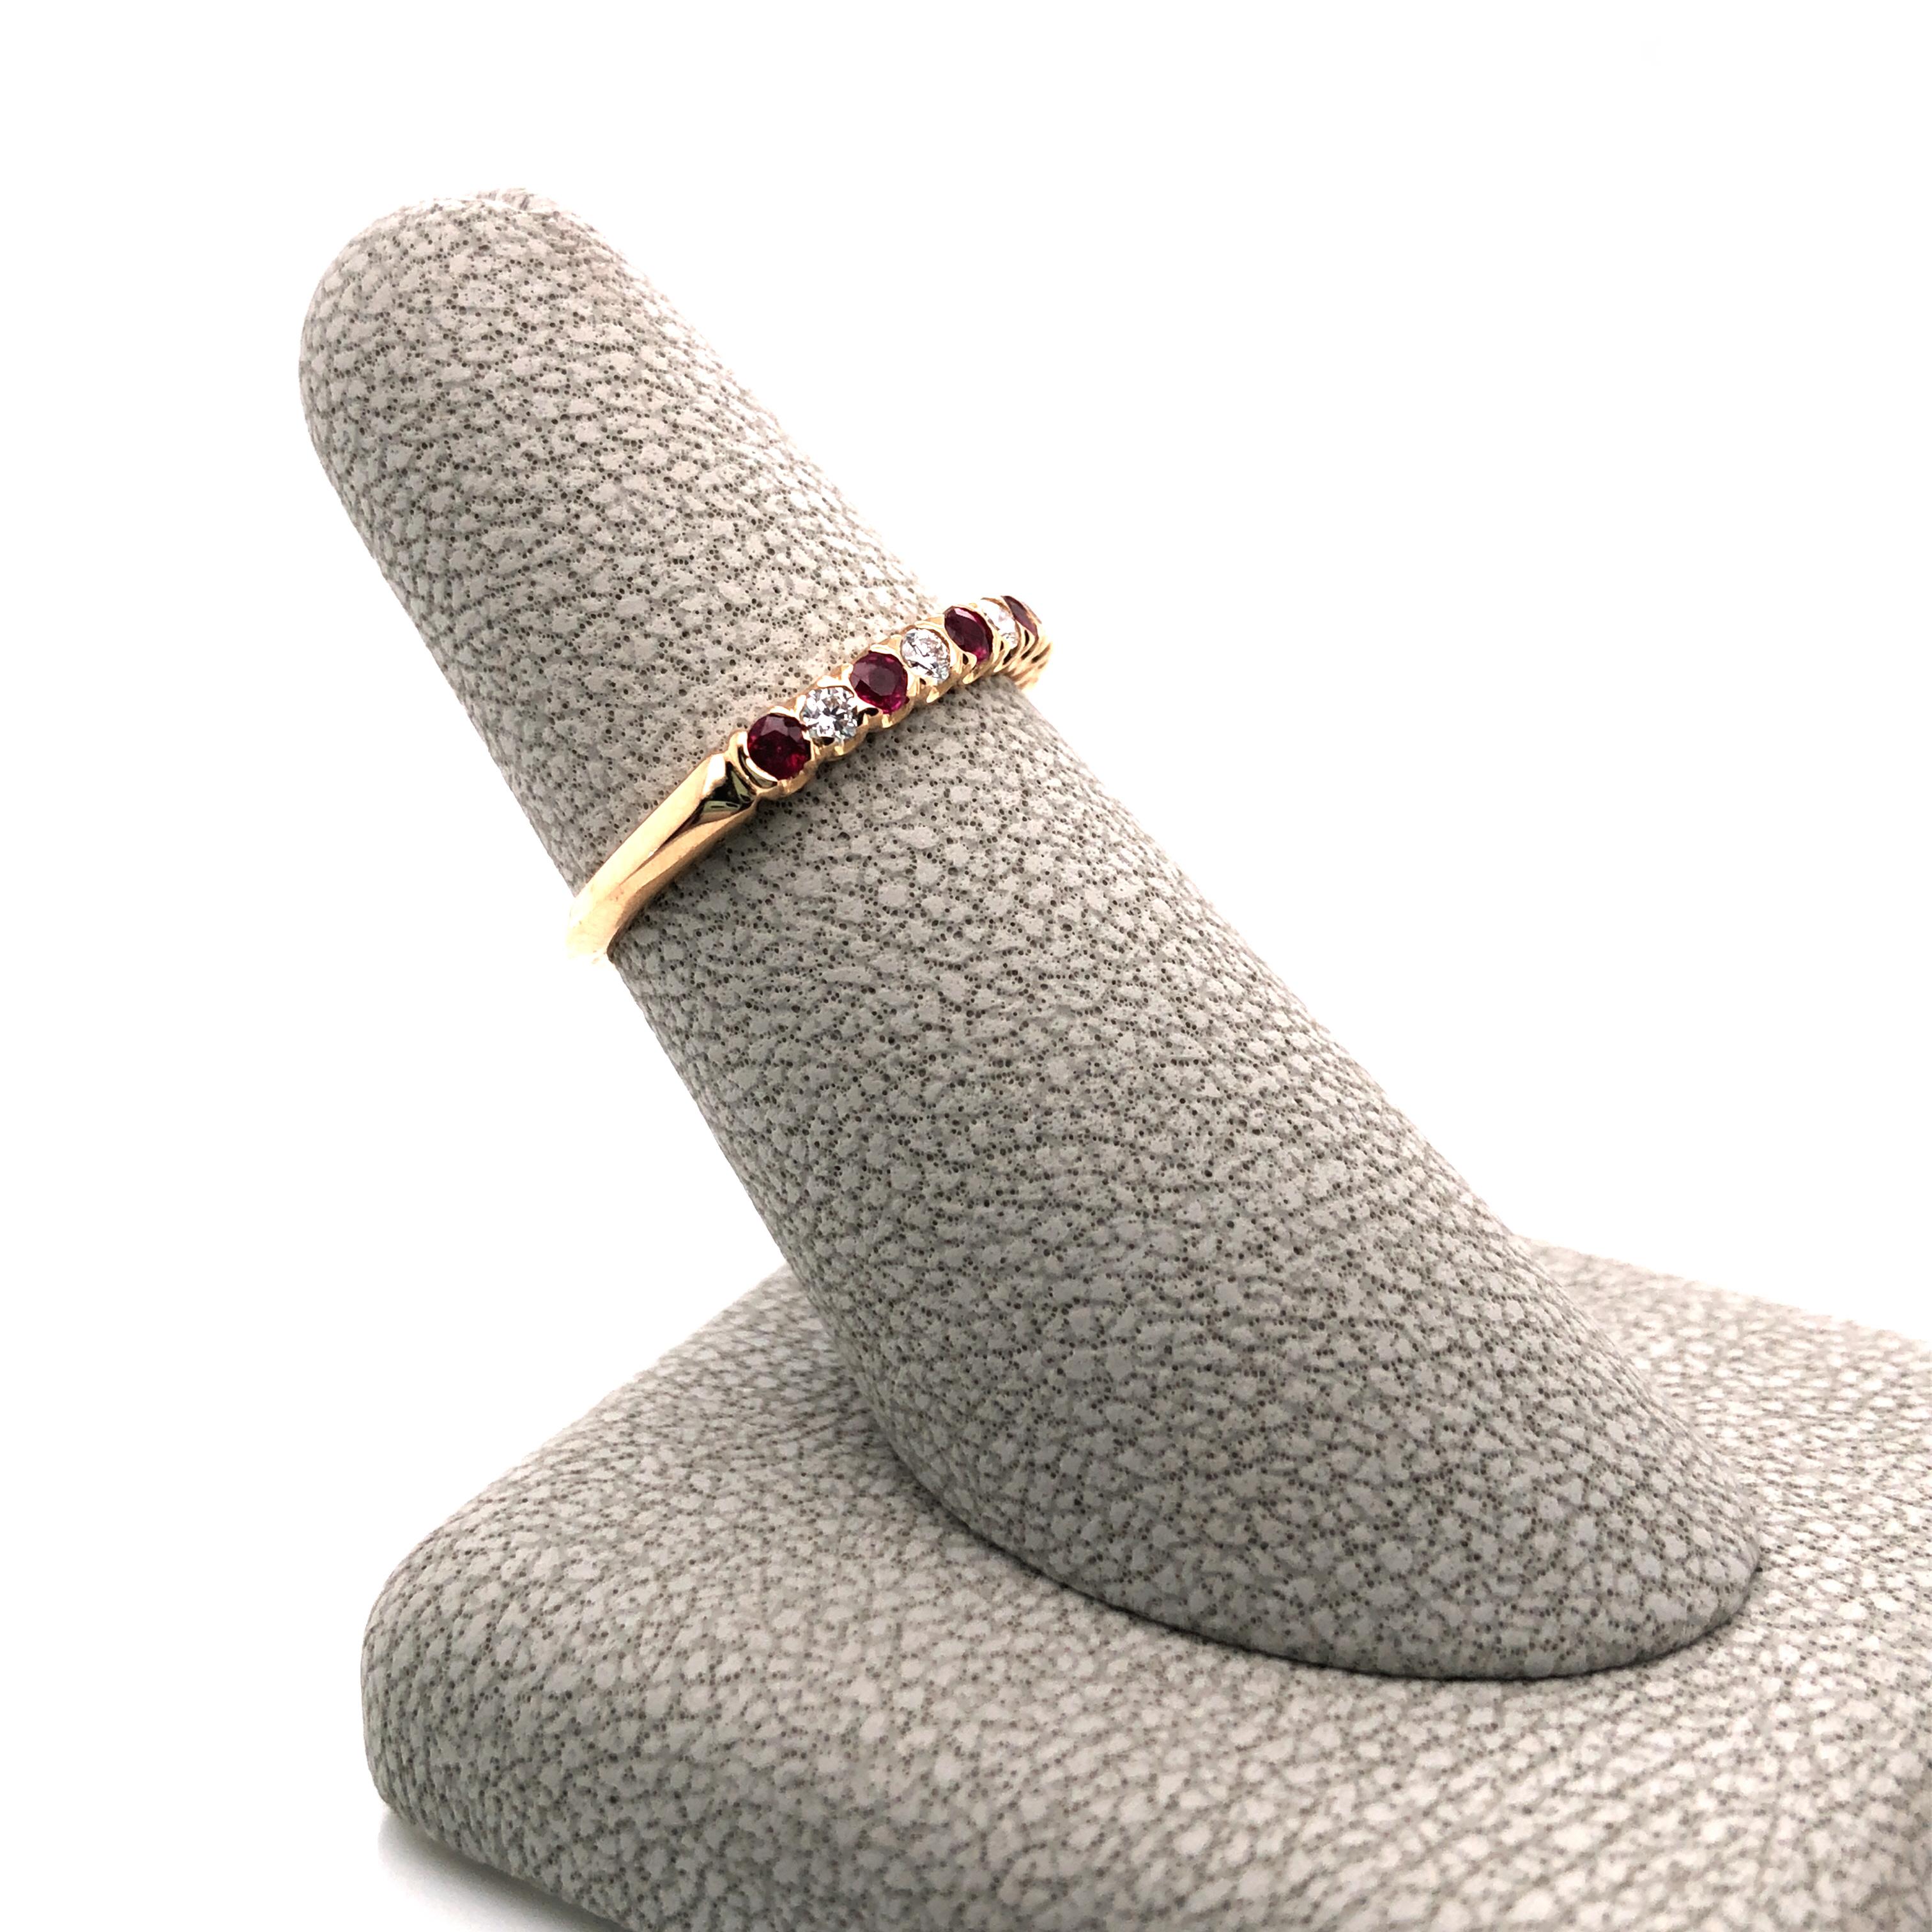 Oscar Heyman 18k yellow gold partway wedding band ring contains 5 round diamonds (F-G/VS, 0.15tcw) and 6 round rubies (0.31tcw). The stones are set in the 'fishtail' style, which is similar to bezel setting with the side metal cut away to expose